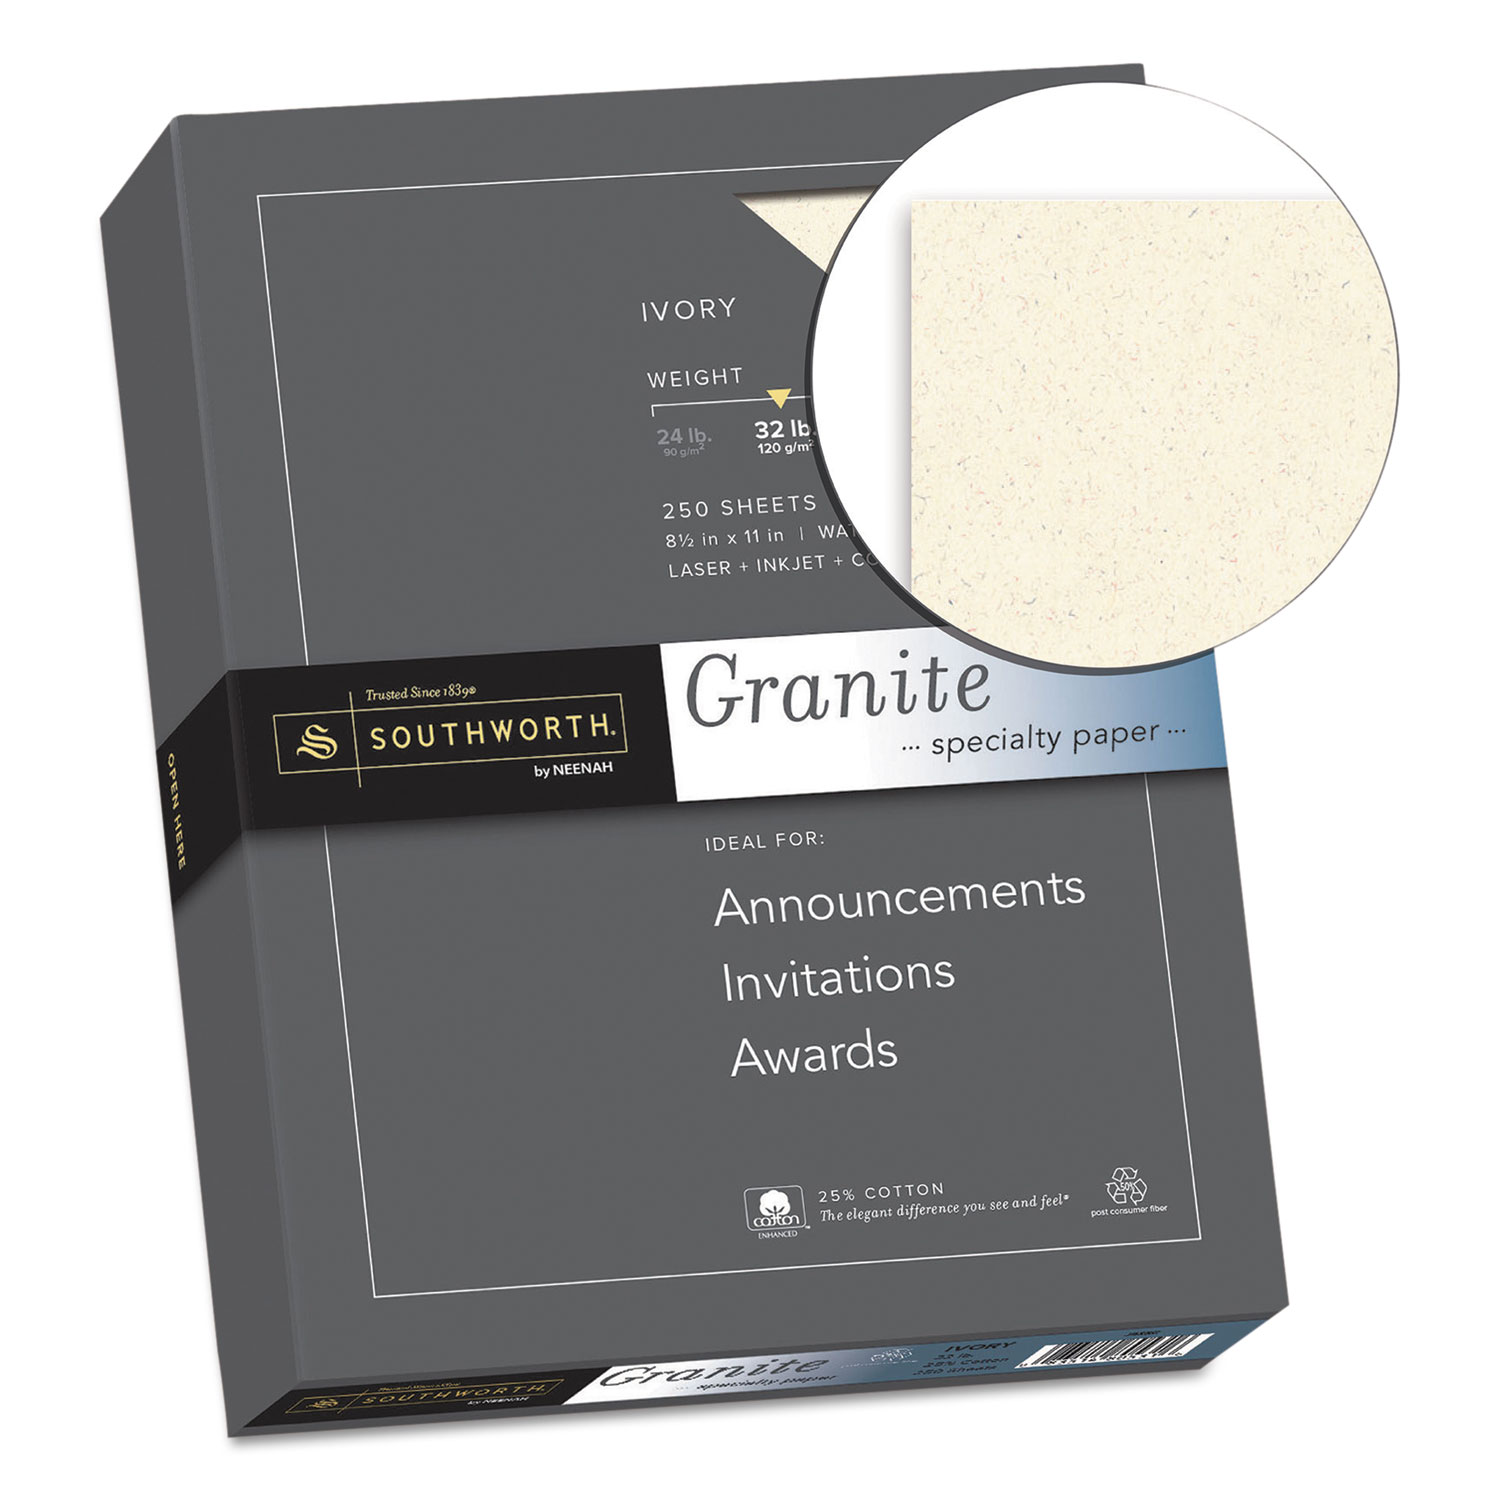 Granite Specialty Paper, Ivory, 32lb, 8 1/2 x 11, 25% Cotton, 250 Sheets